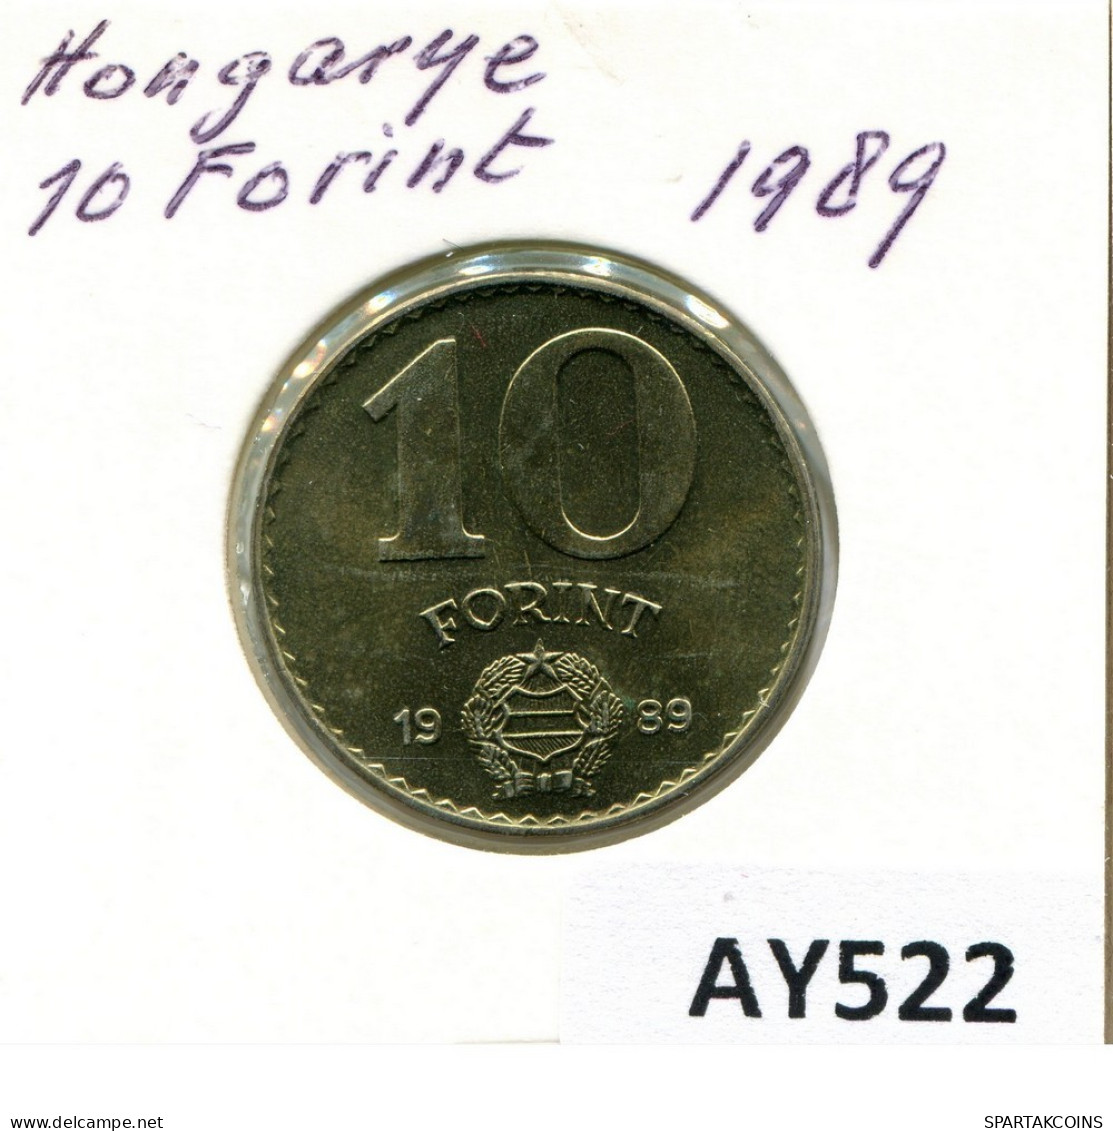 10 FORINT 1989 HUNGARY Coin #AY522.U.A - Ungheria